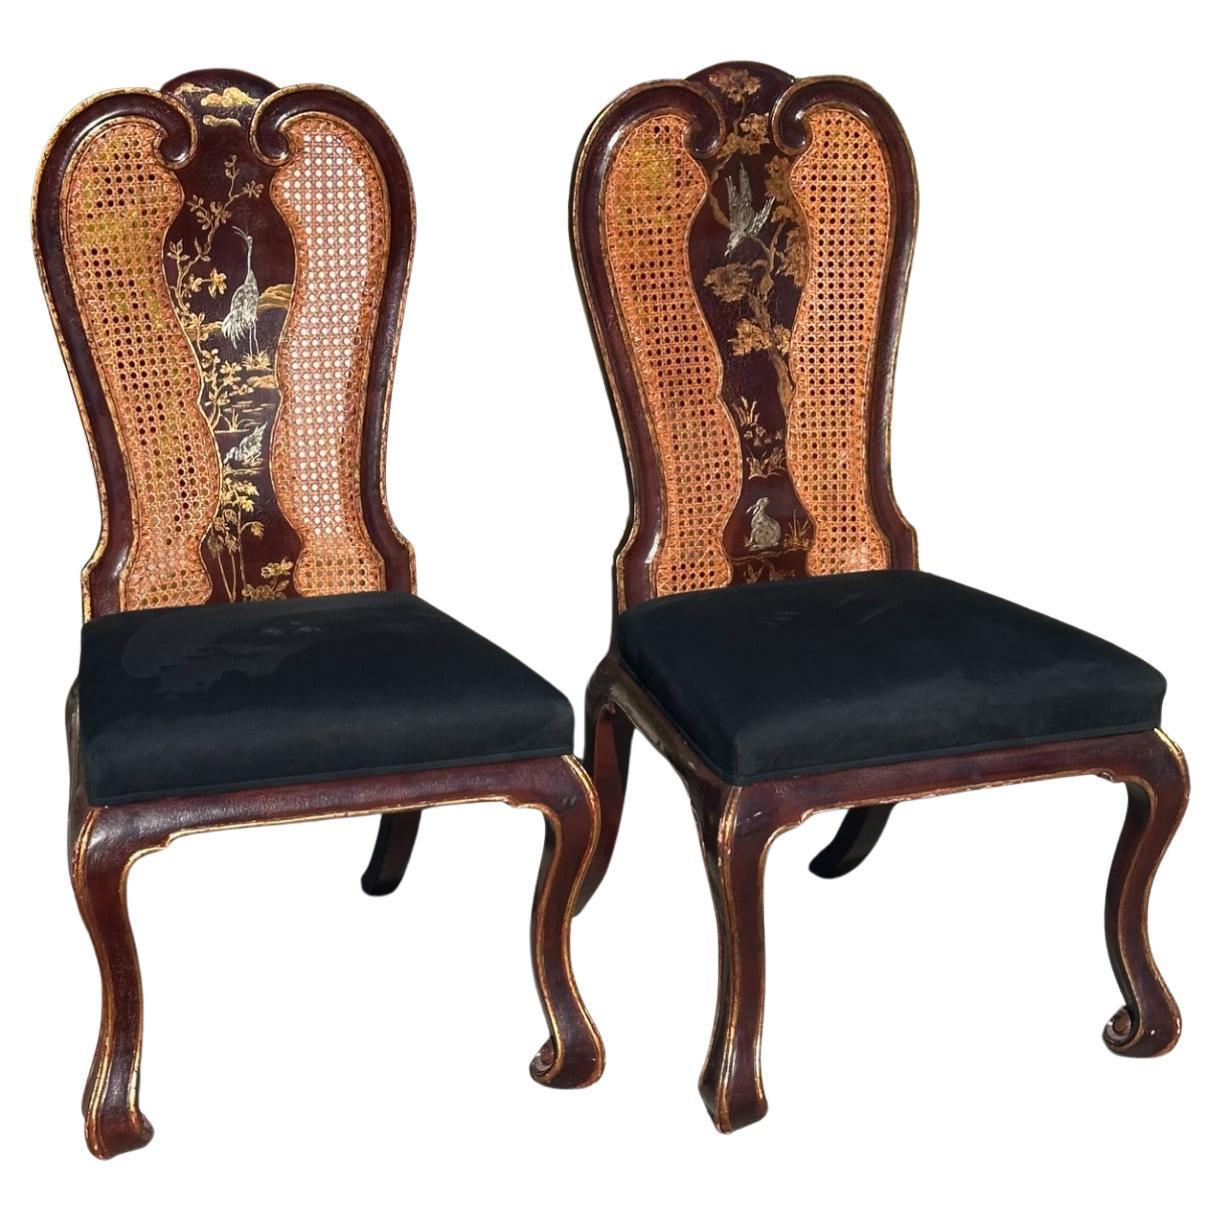 Rose Tarlow Melrose House Chinoiserie Chairs - a Pair For Sale